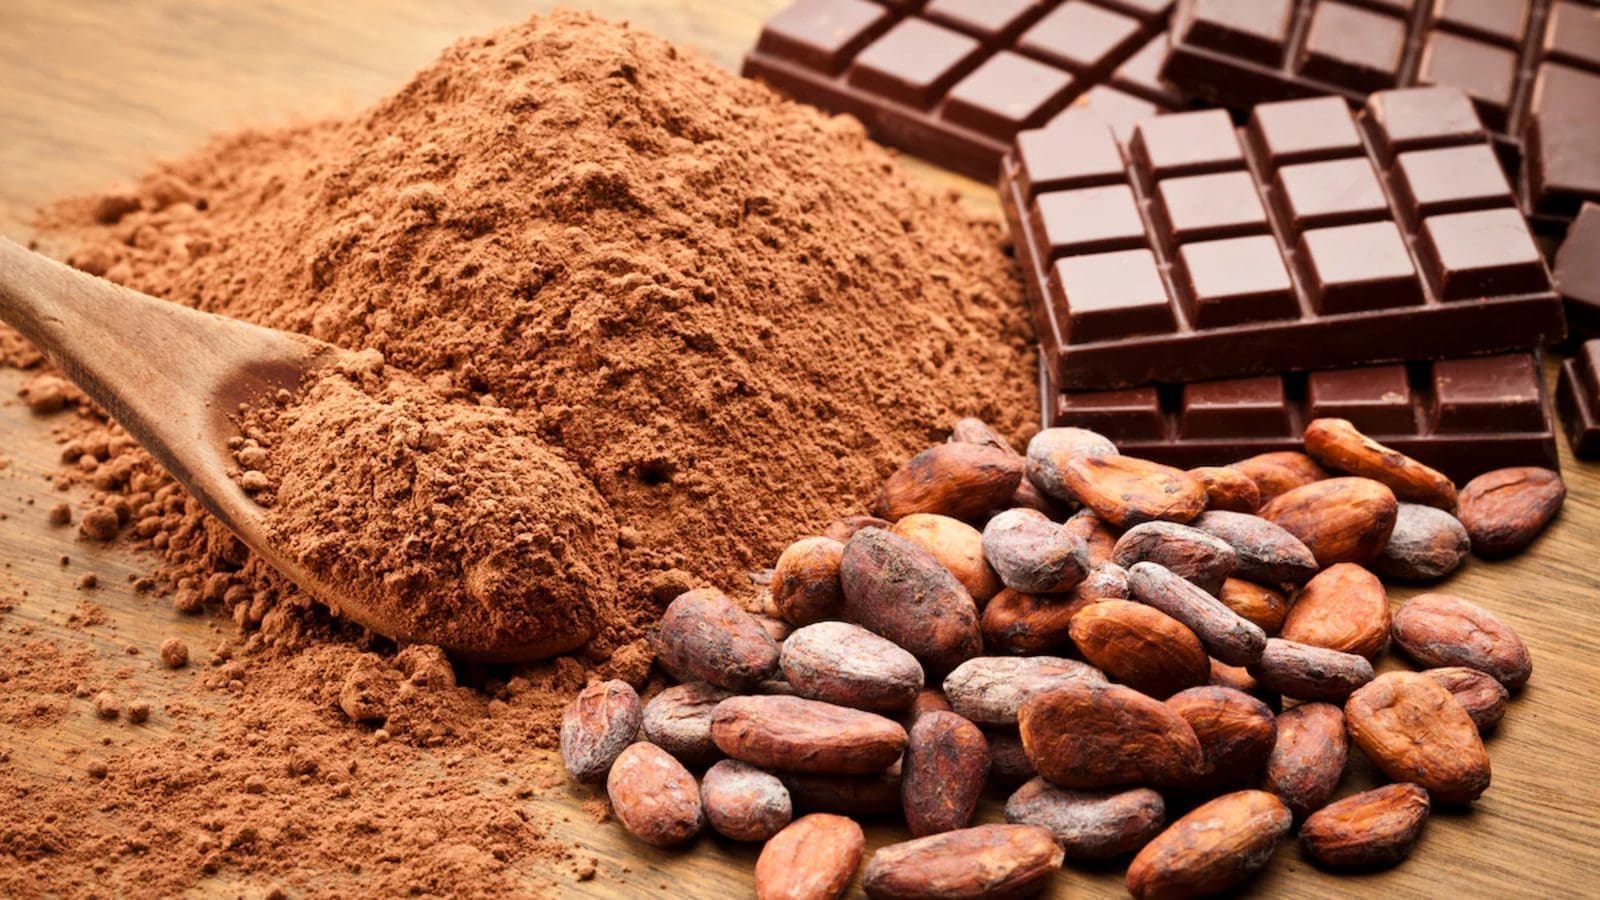 Chocolate prices could rise further amidst concerns of cocoa crop shortage